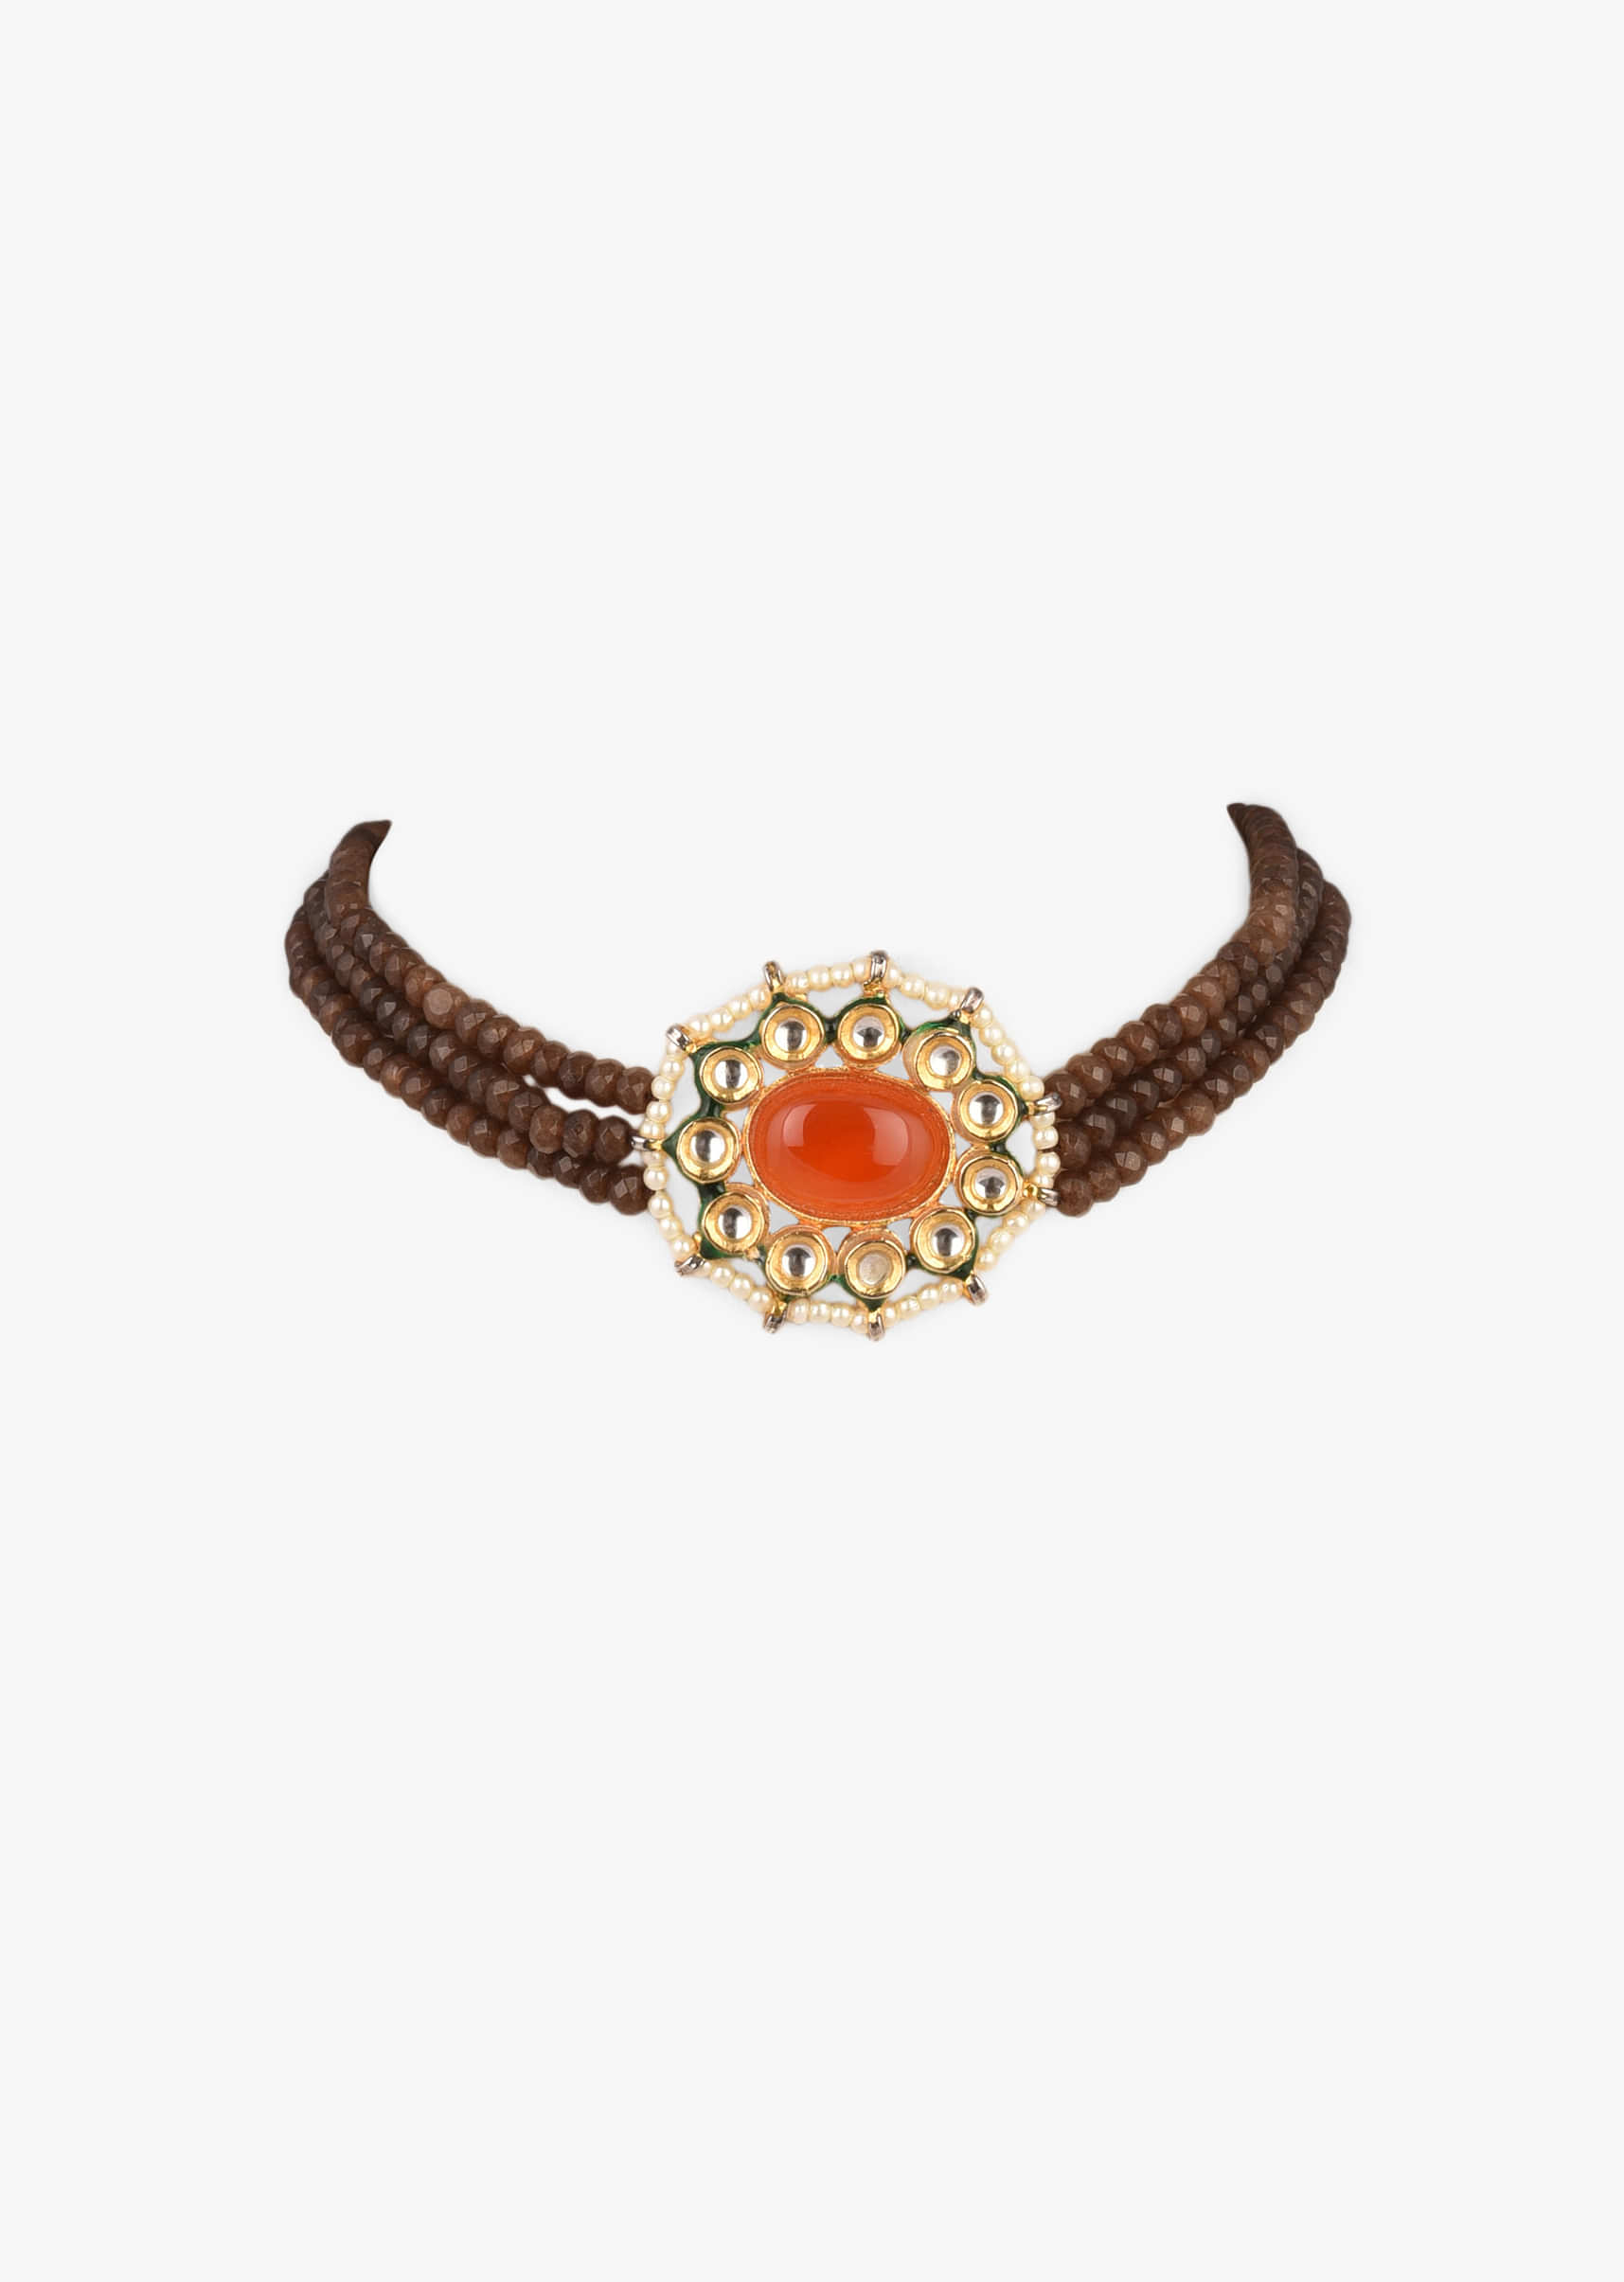 Gold Plated Choker Necklace With Orange Oval Stone Centre And Brown Bead Strings 